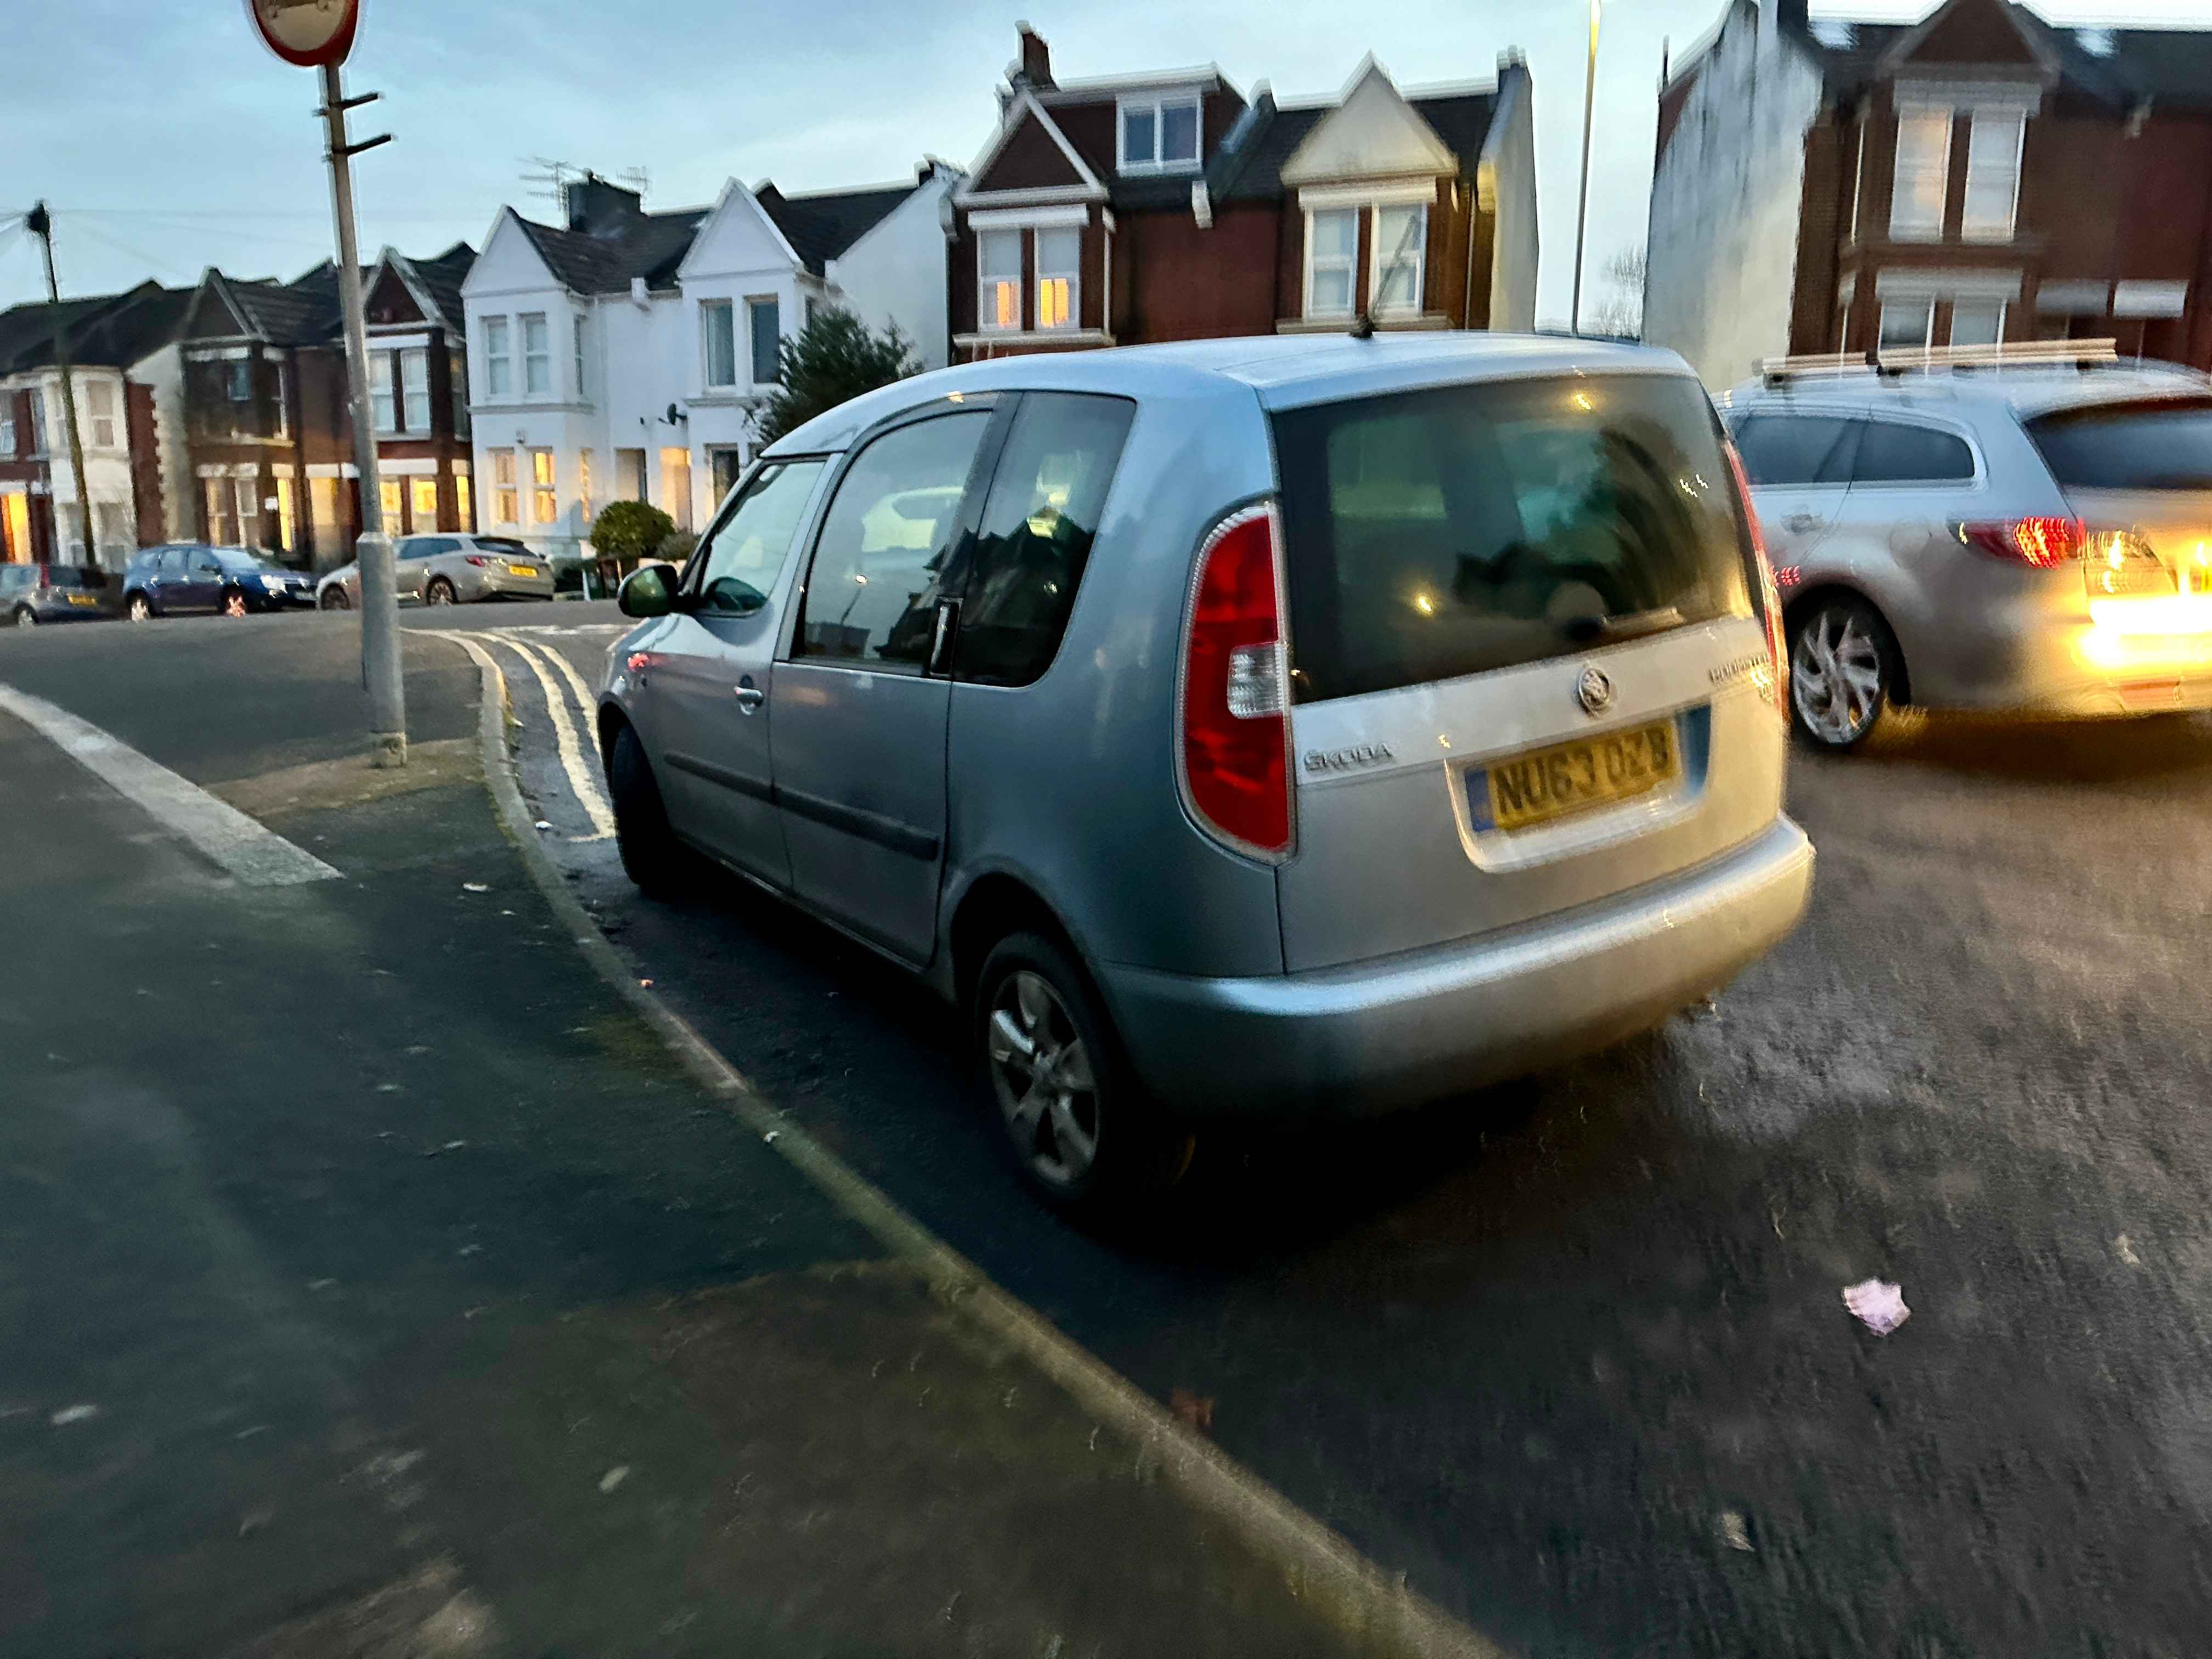 Photograph of NU63 OZB - a Blue Skoda Roomster parked in Hollingdean by a non-resident. The fifteenth of nineteen photographs supplied by the residents of Hollingdean.